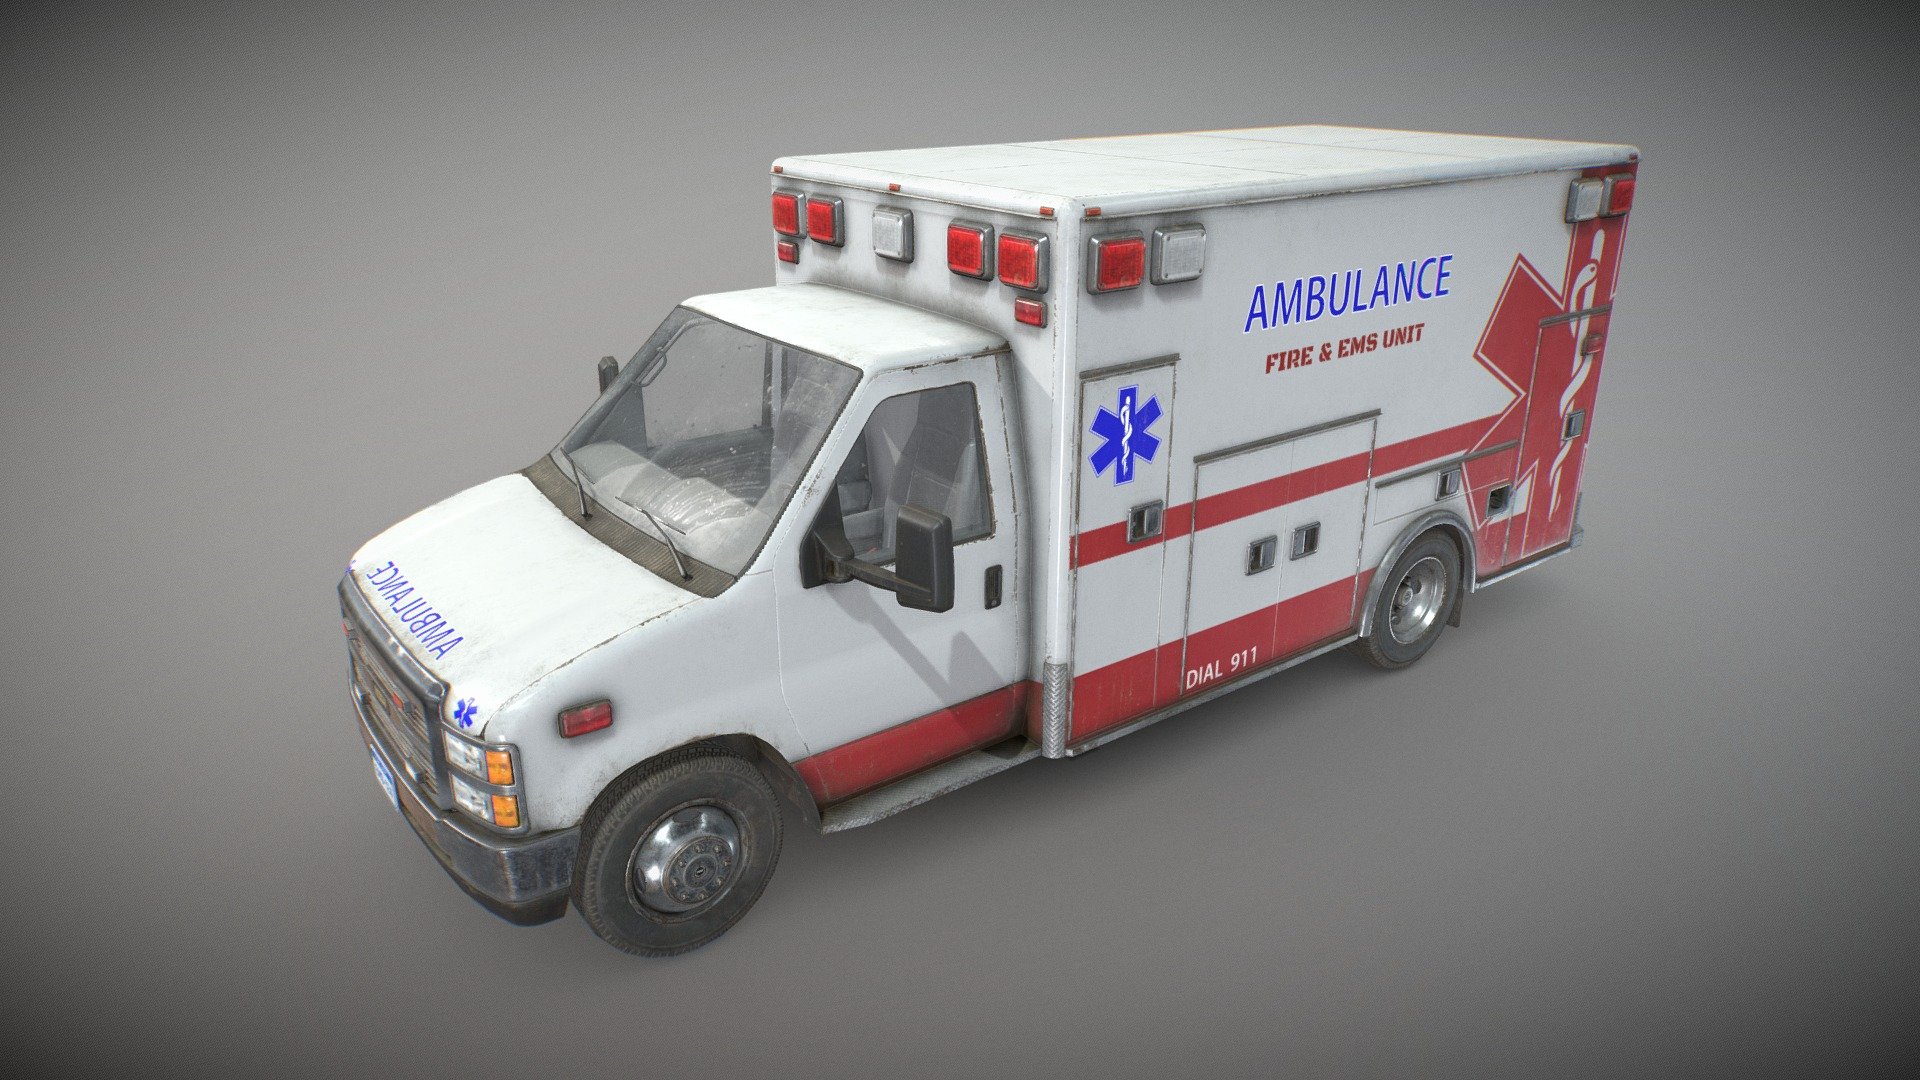 Game Ready Ambulance with finished interior and Stretcher included:


The unit of measurement used is centimeters
Front and back doors, wheels and steering wheel are separated and can be easily rigged/animated.
Interior and Box Interior are separate objects to detach if needed.
Stretcher as separate object and with 2 versions (open and folded)
PBR textures
All branding and labels are custom made
Second uv channel included
Packed ORM textures included
Average texel density: 1040 px/m

Polys:


Ambulance: 31.272 tris
Stretcher: 3.344 tris
TOTAL: 34.616 tris

Maps sizes: 


Body: 4096x4096
Details: 4096x4096
Interior: 4096x4096
Box Interior: 4096x4096
Wheels: 2048x2048
Windows: 2048x2048
Stretcher: 2048x2048

Provided Maps:


Albedo 
Normal
Roughness
Metalness
AO
Opacity included in Albedo (windows)
Emissive

Formats Incuded - MAX / BLEND / OBJ / FBX 

This model can be used for any game, film, personal project, etc. You may not resell or redistribute - Ambulance Type 3 - Low Poly - Buy Royalty Free 3D model by MSWoodvine 3d model